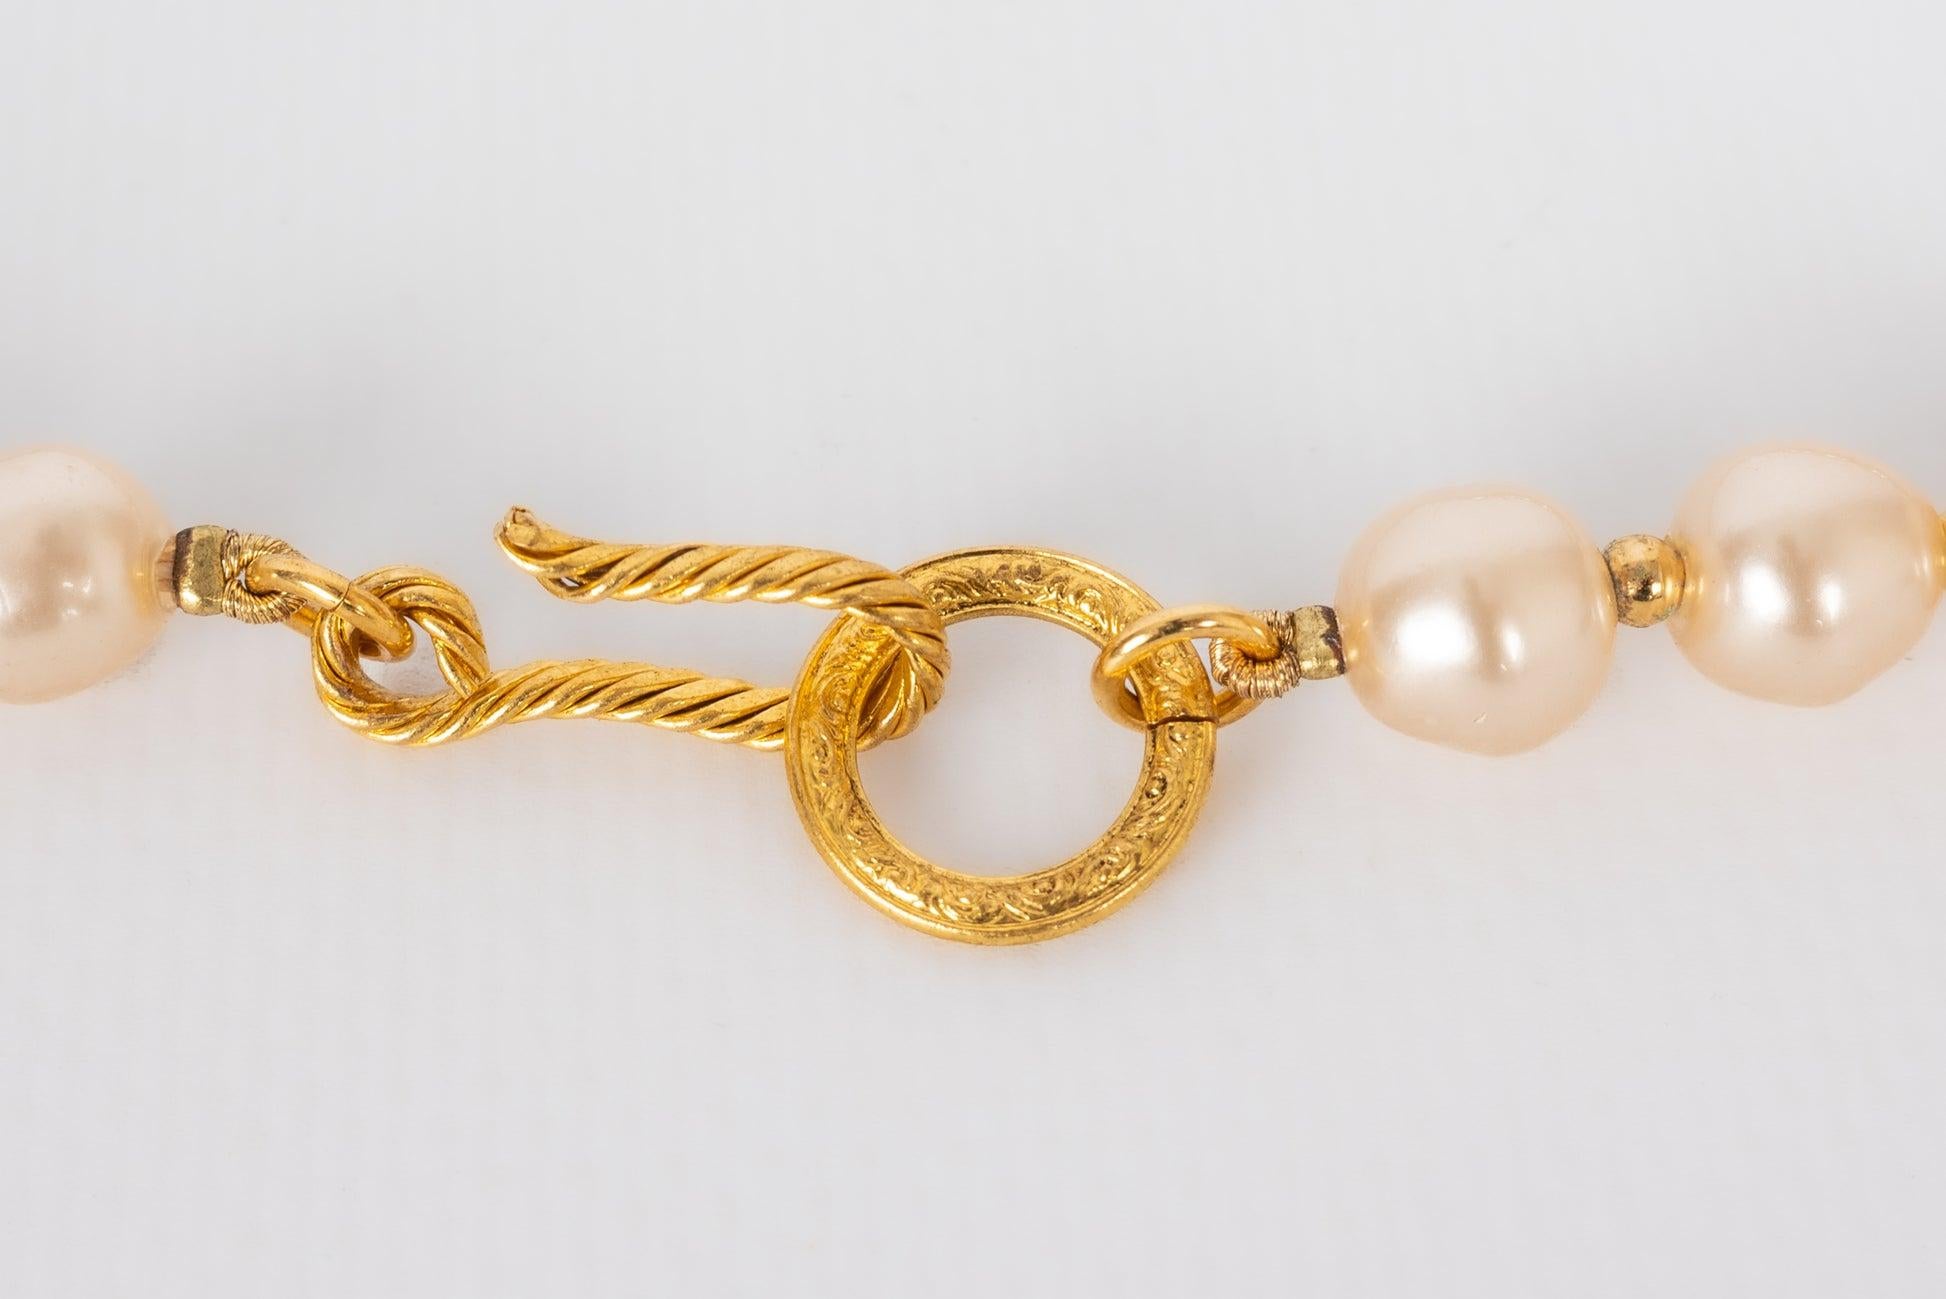 Women's Chanel Necklace in Costume Pearly Beads and Gold-Plated Metal, 1990s For Sale